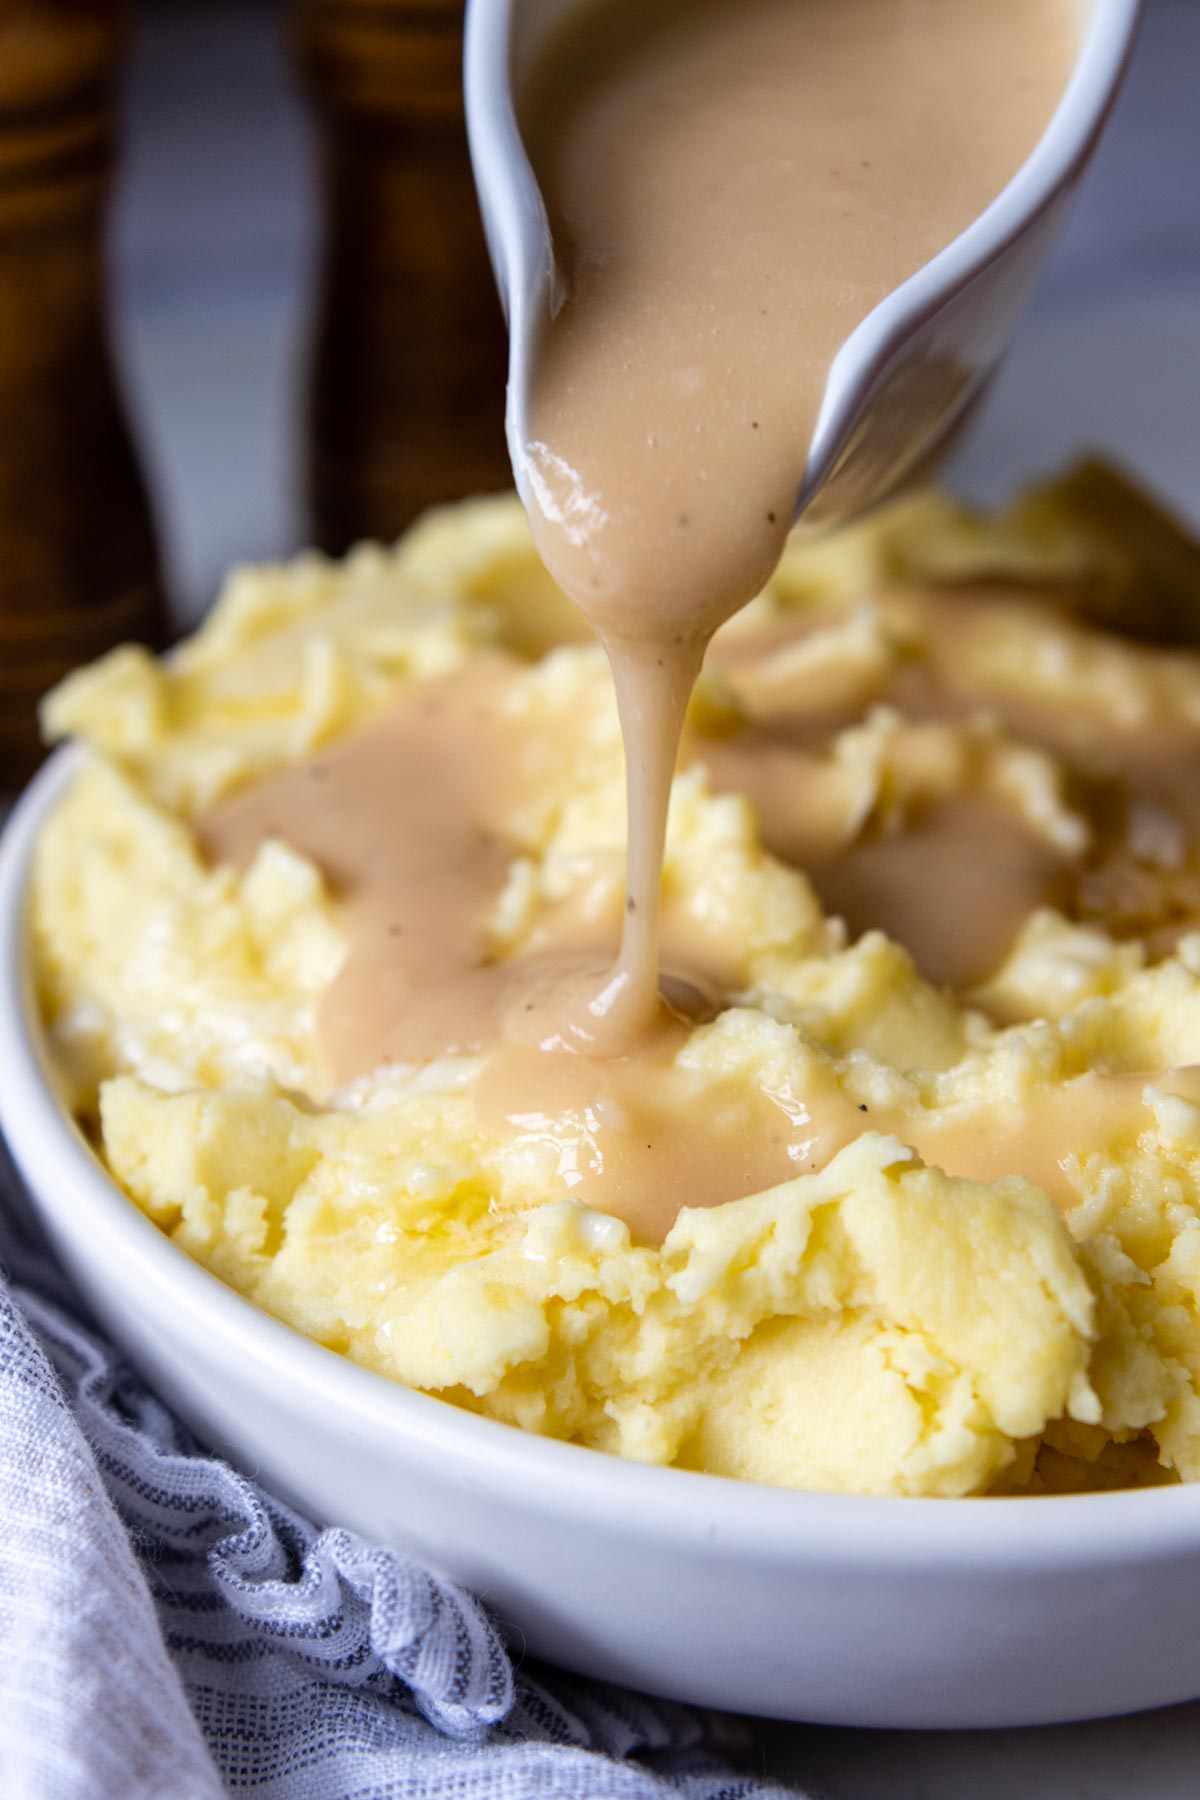 gluten free gravy being poured over mashed potatoes.